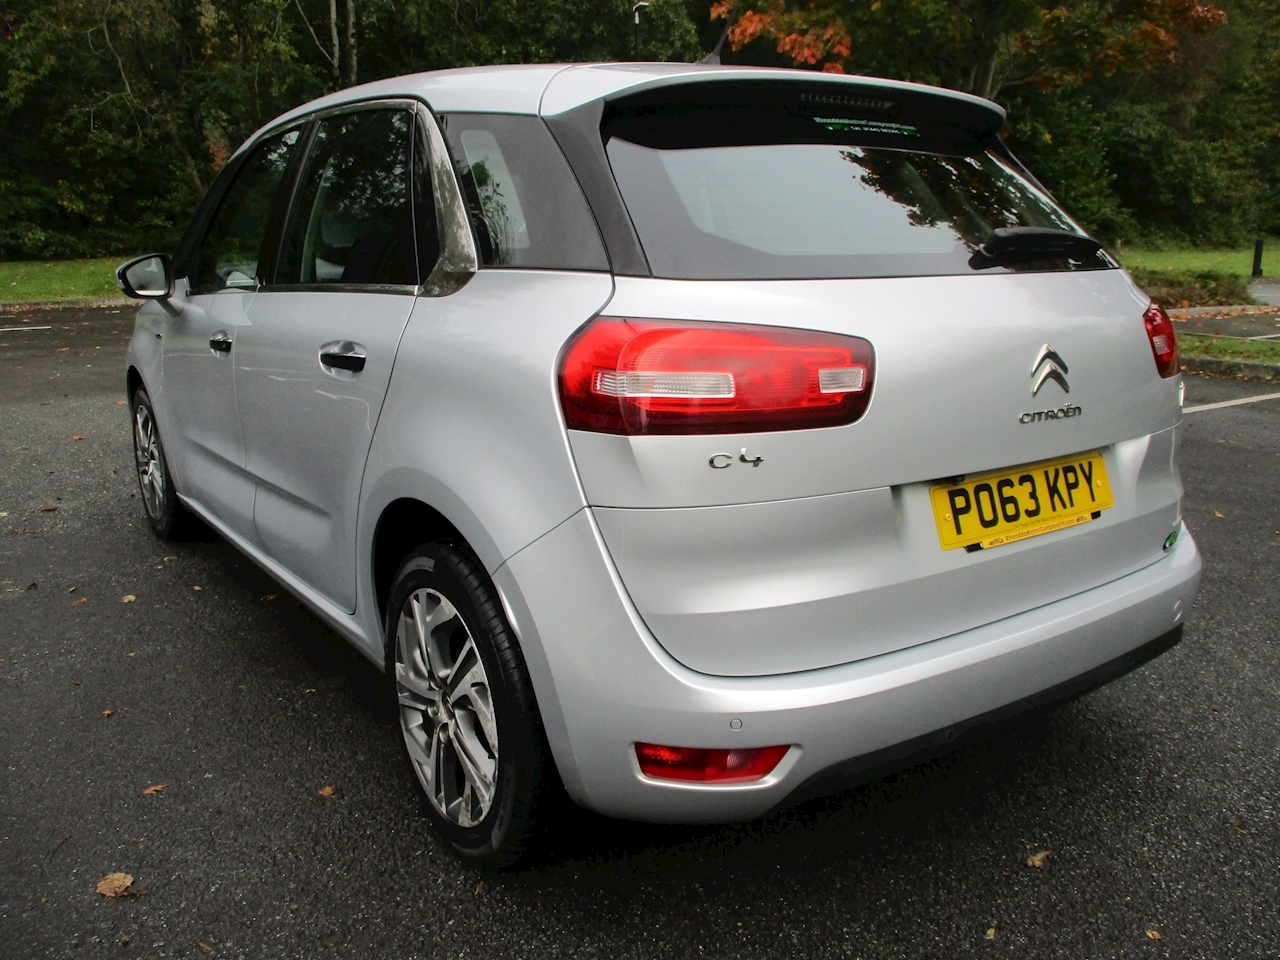 C4 Picasso Exclusive MPV 1.6 Manual Diesel